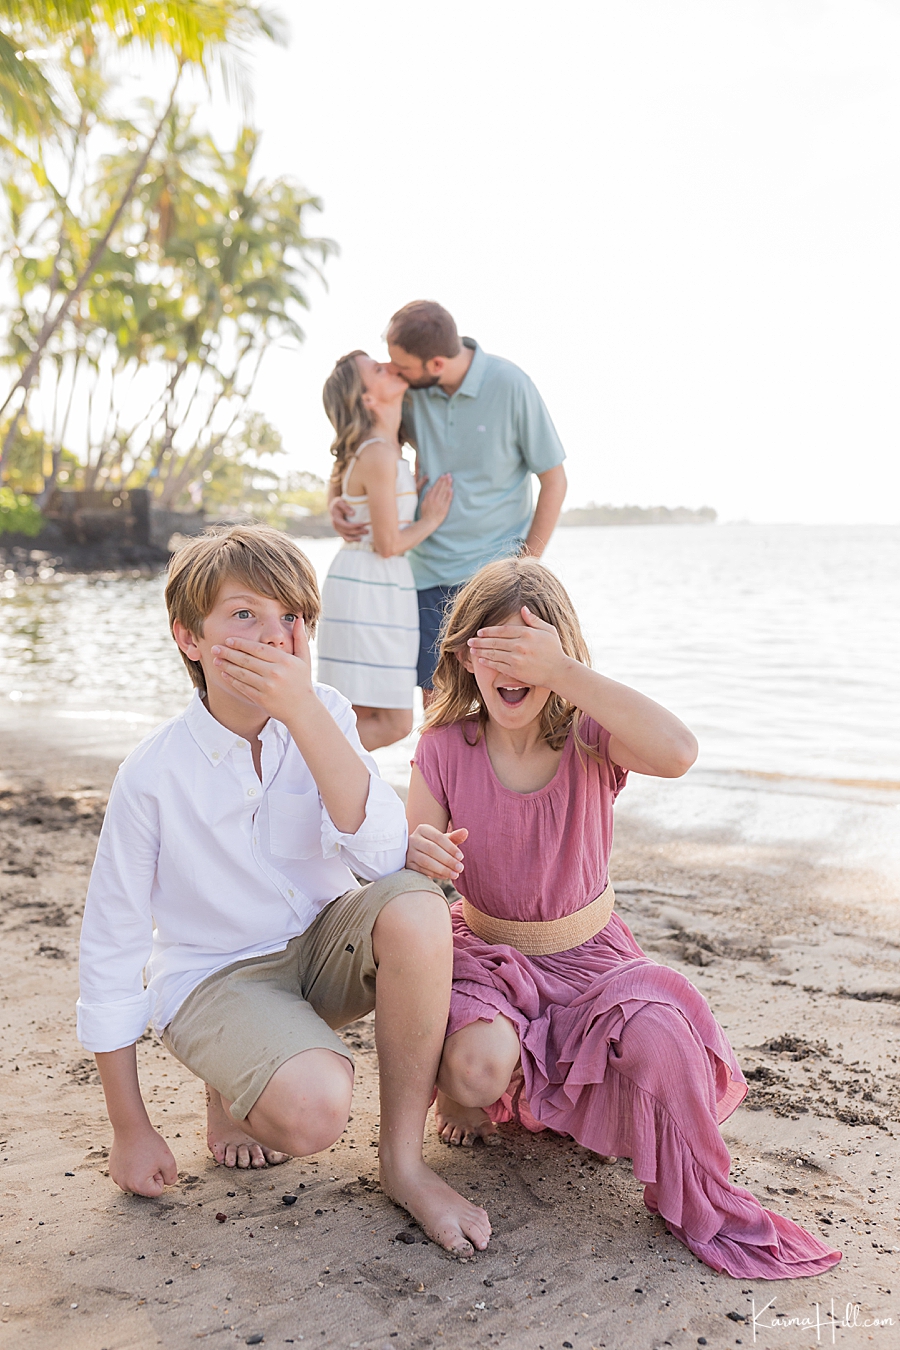 children cover eyes and mouth as parents kiss on Maui beach 